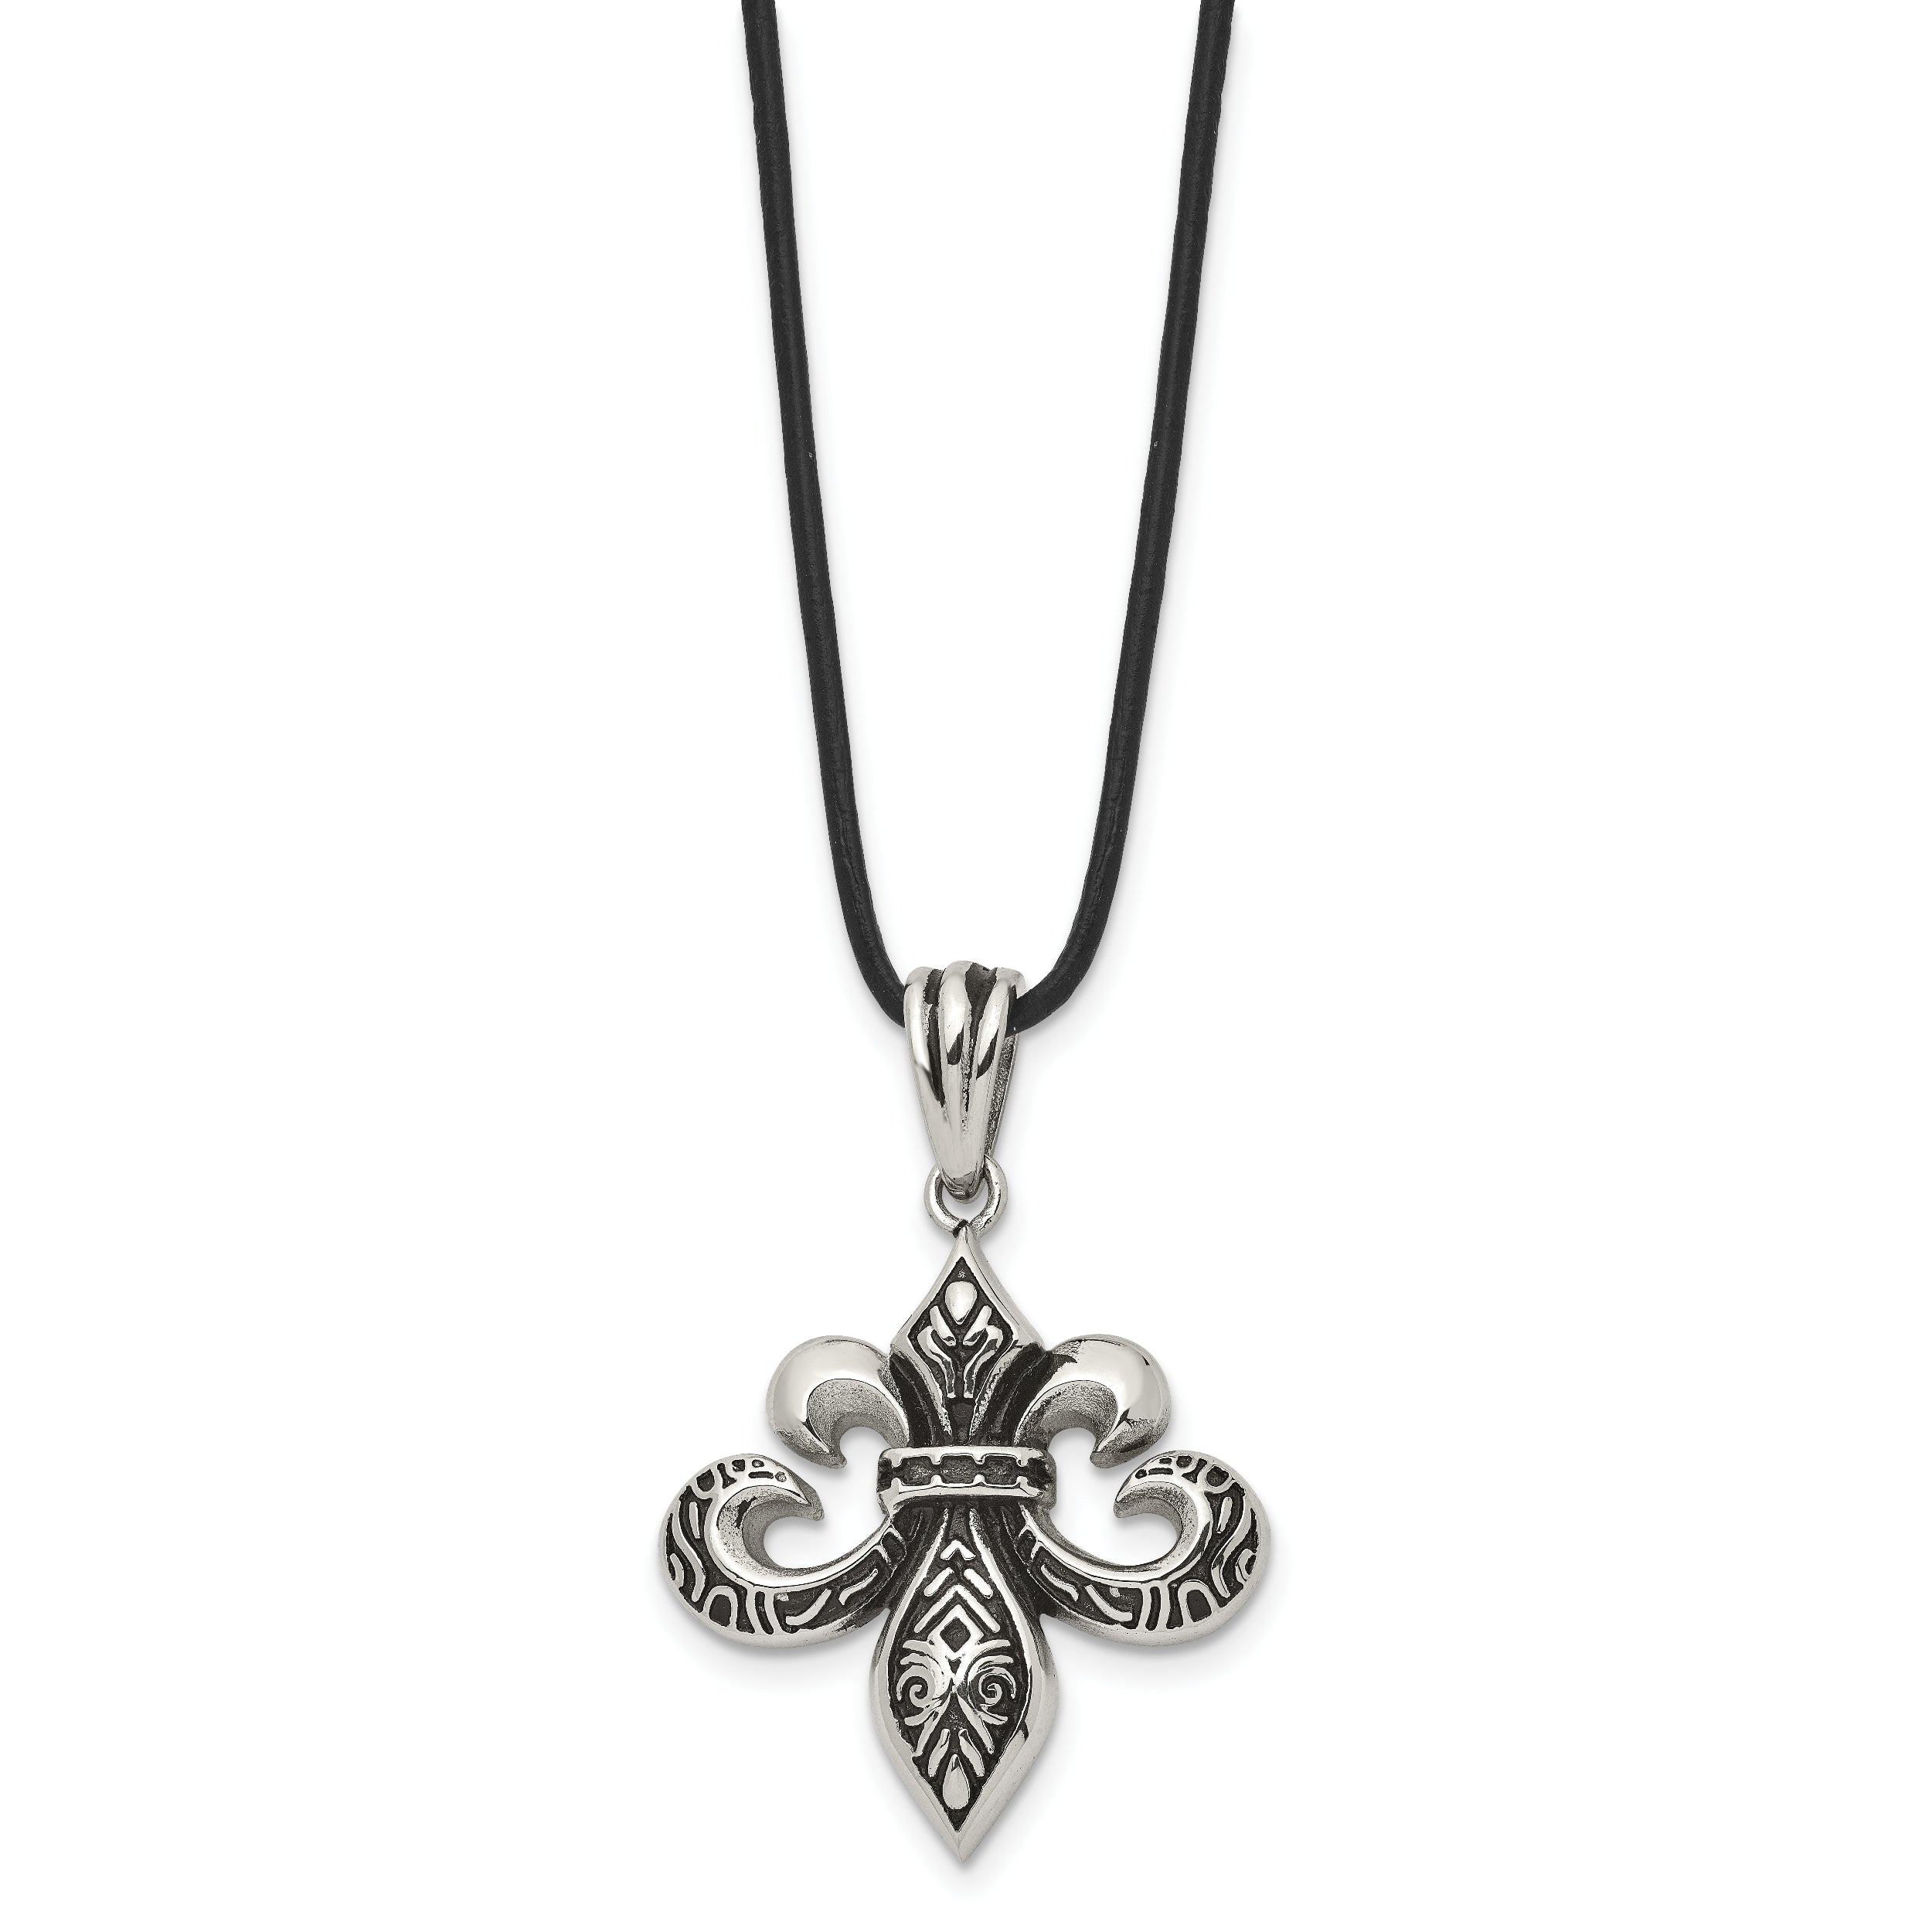 Chisel Stainless Steel Antiqued and Polished Fleur de lis Pendant on a 20 inch Leather Cord Necklace